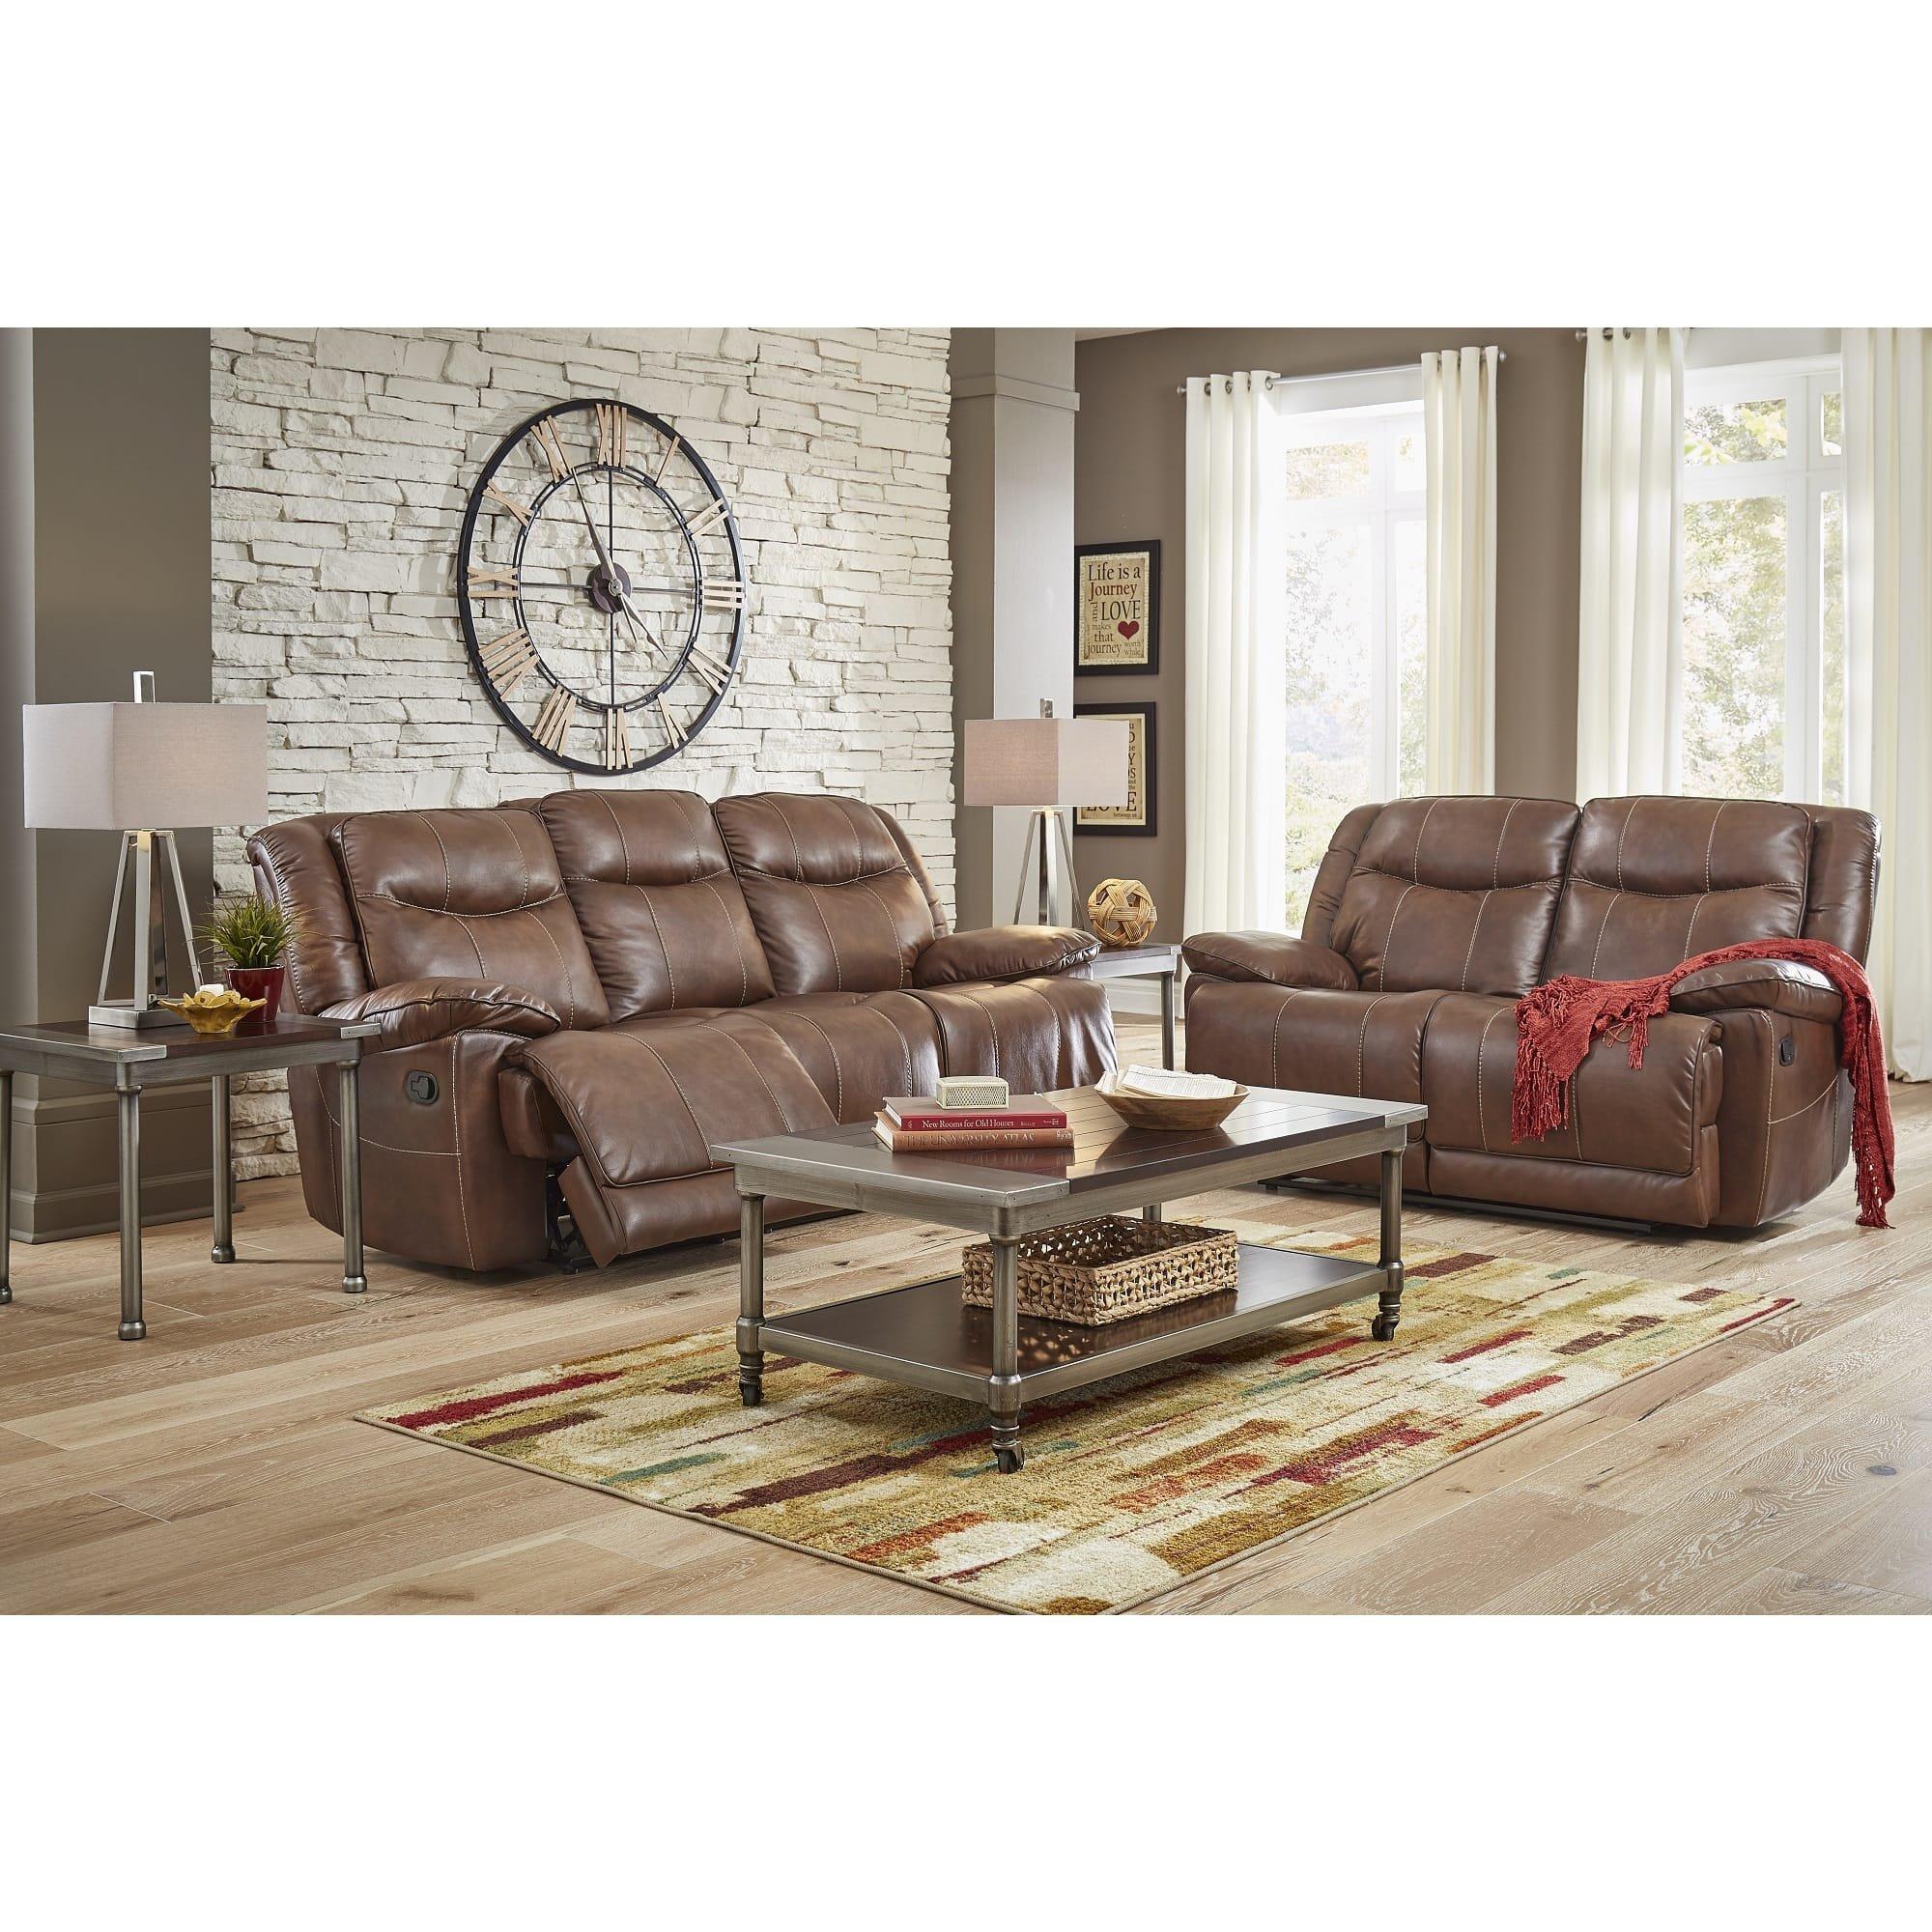 Rent To Own Amalfi 7 Piece Barron Reclining Living Room Collection At Aarons Today